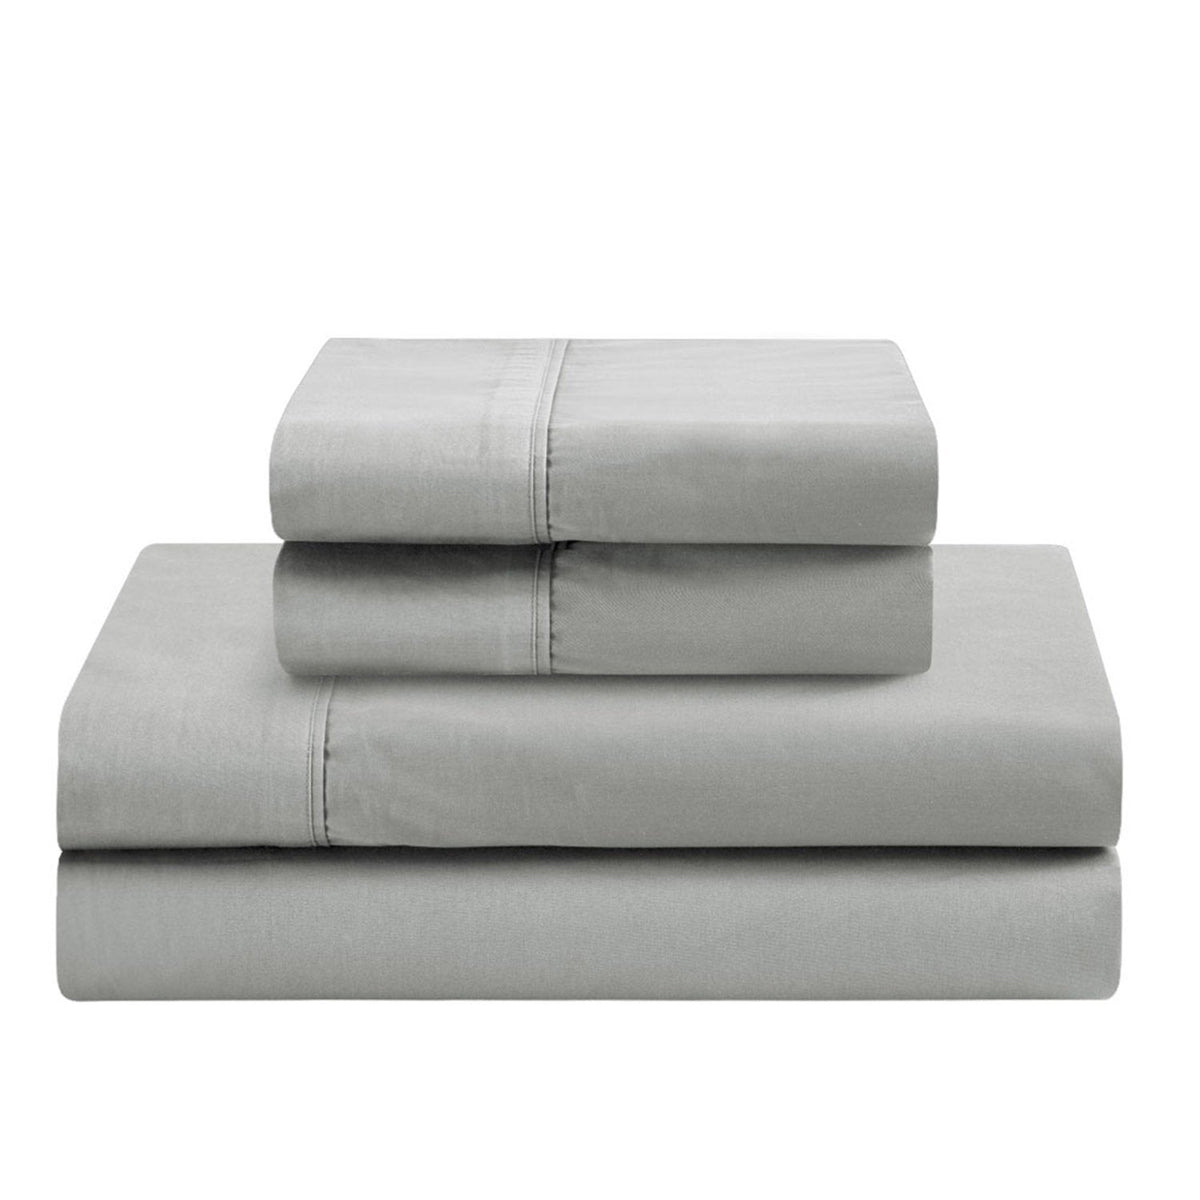 400 Thread Count Cotton Bed Sheet Set Silver - Folded